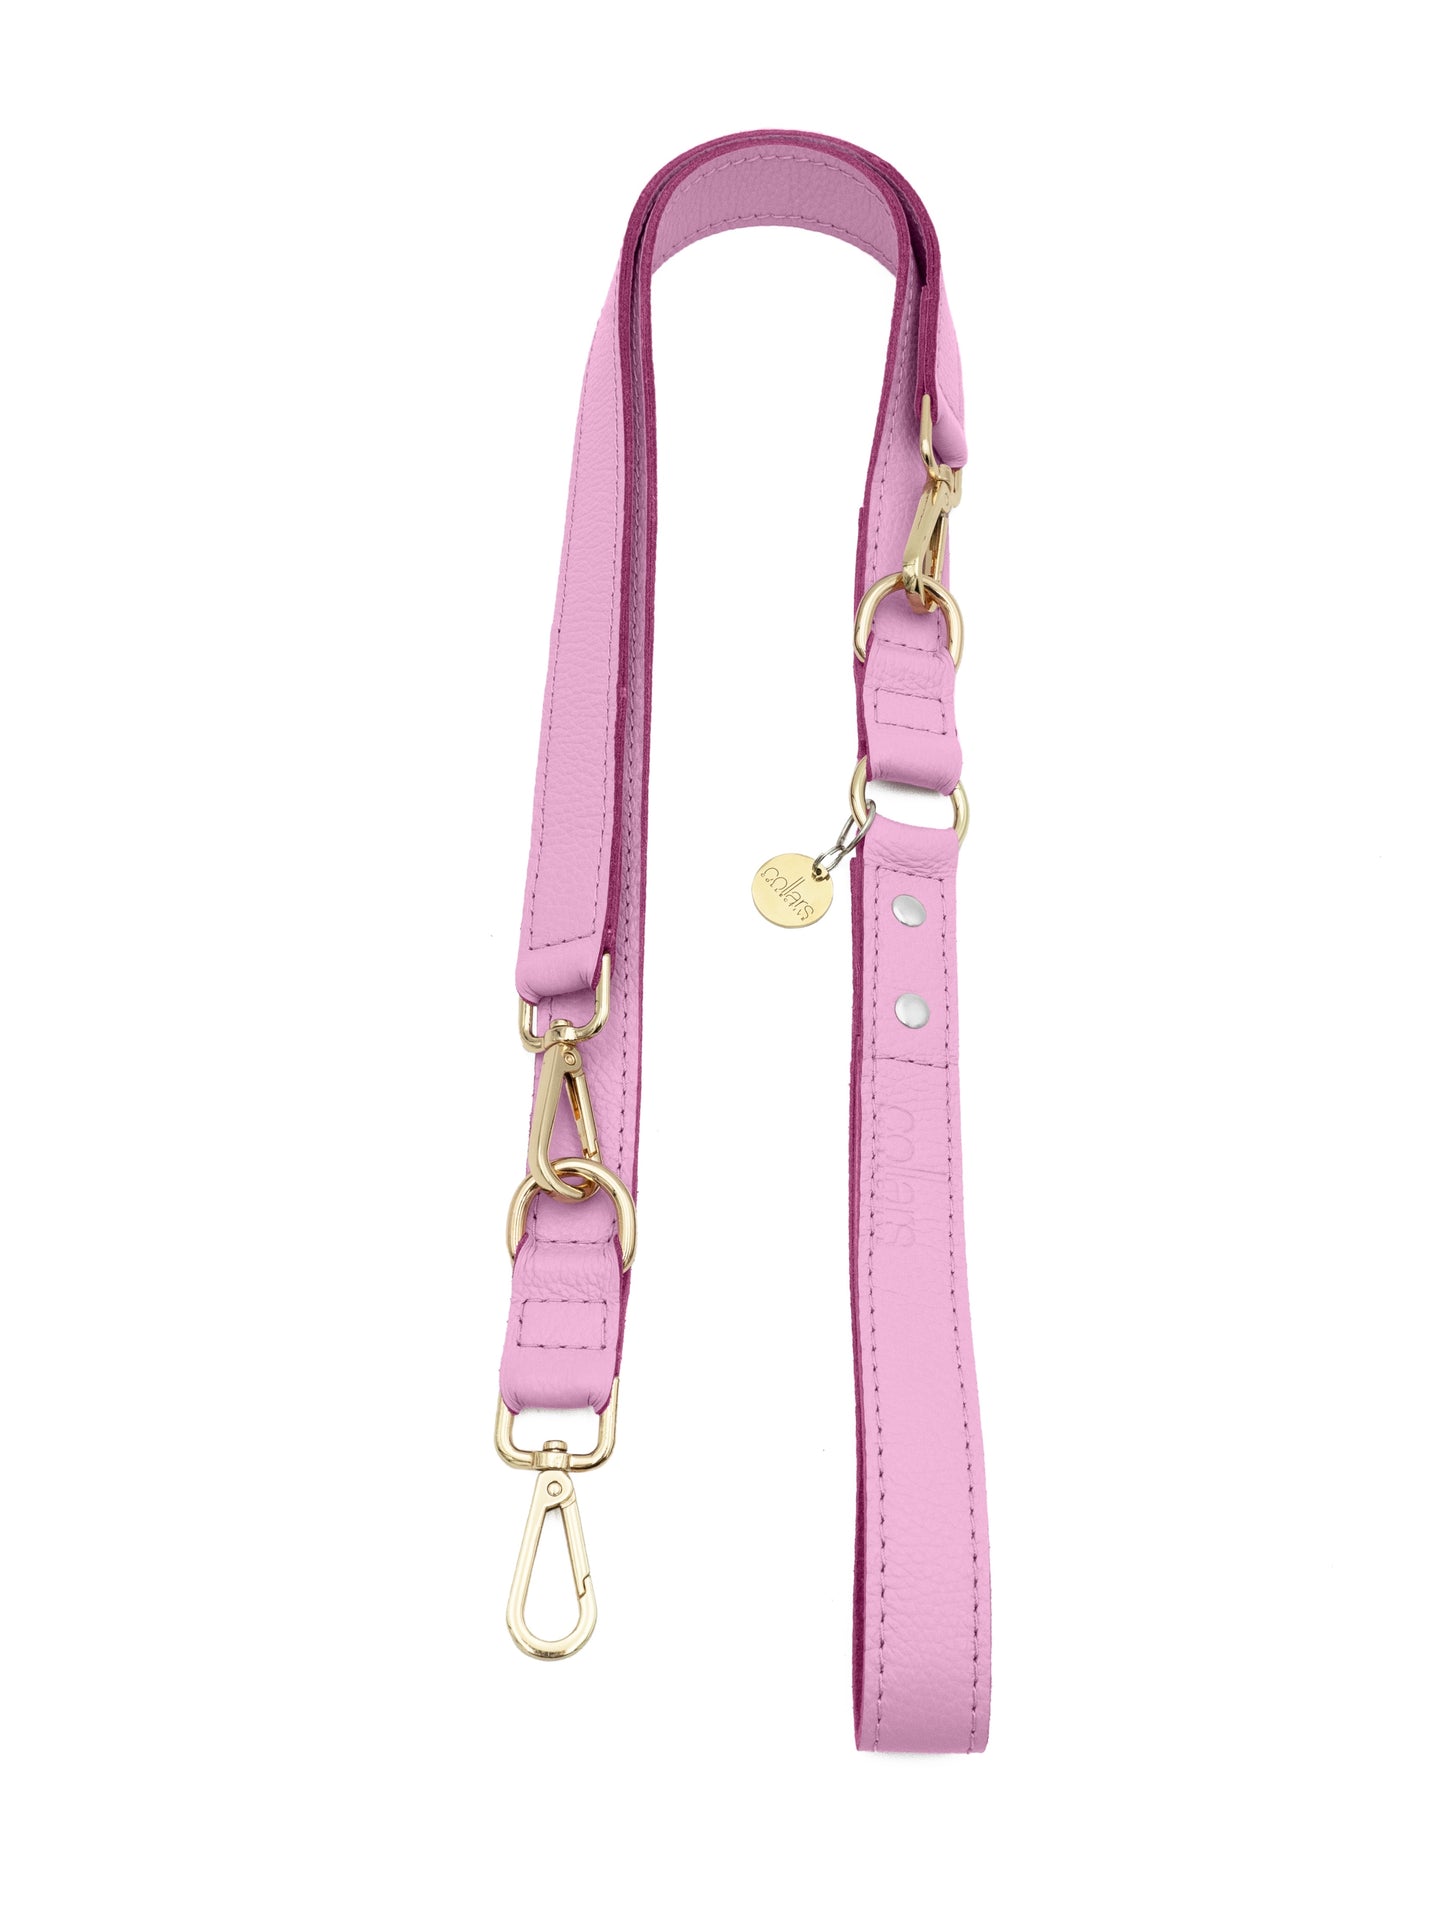 The Candy Iconic Leash